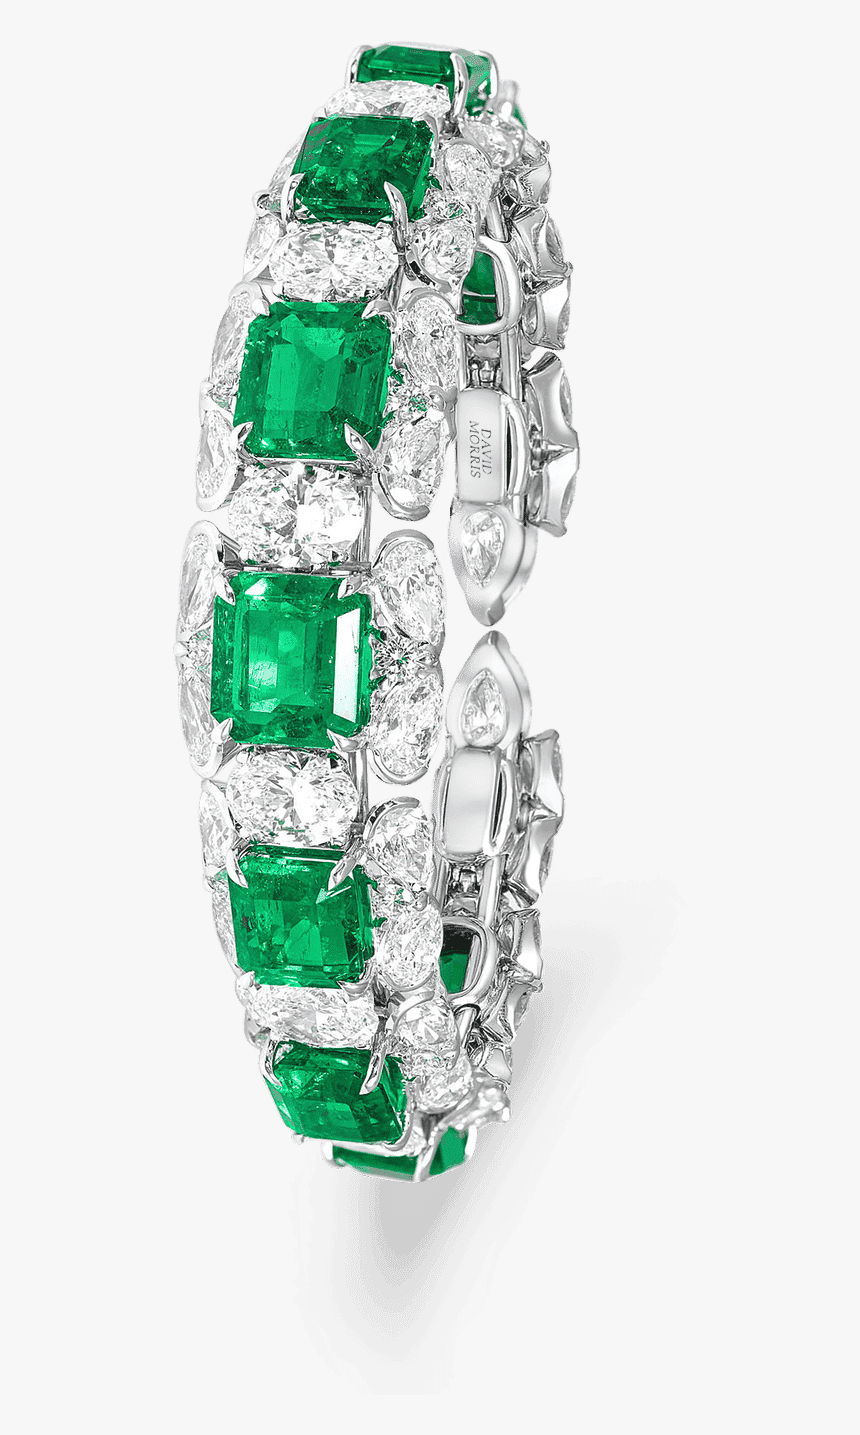 Pirouette Emerald Bangle - Diamond Luxury Jewellery Png, Transparent Png, Free Download